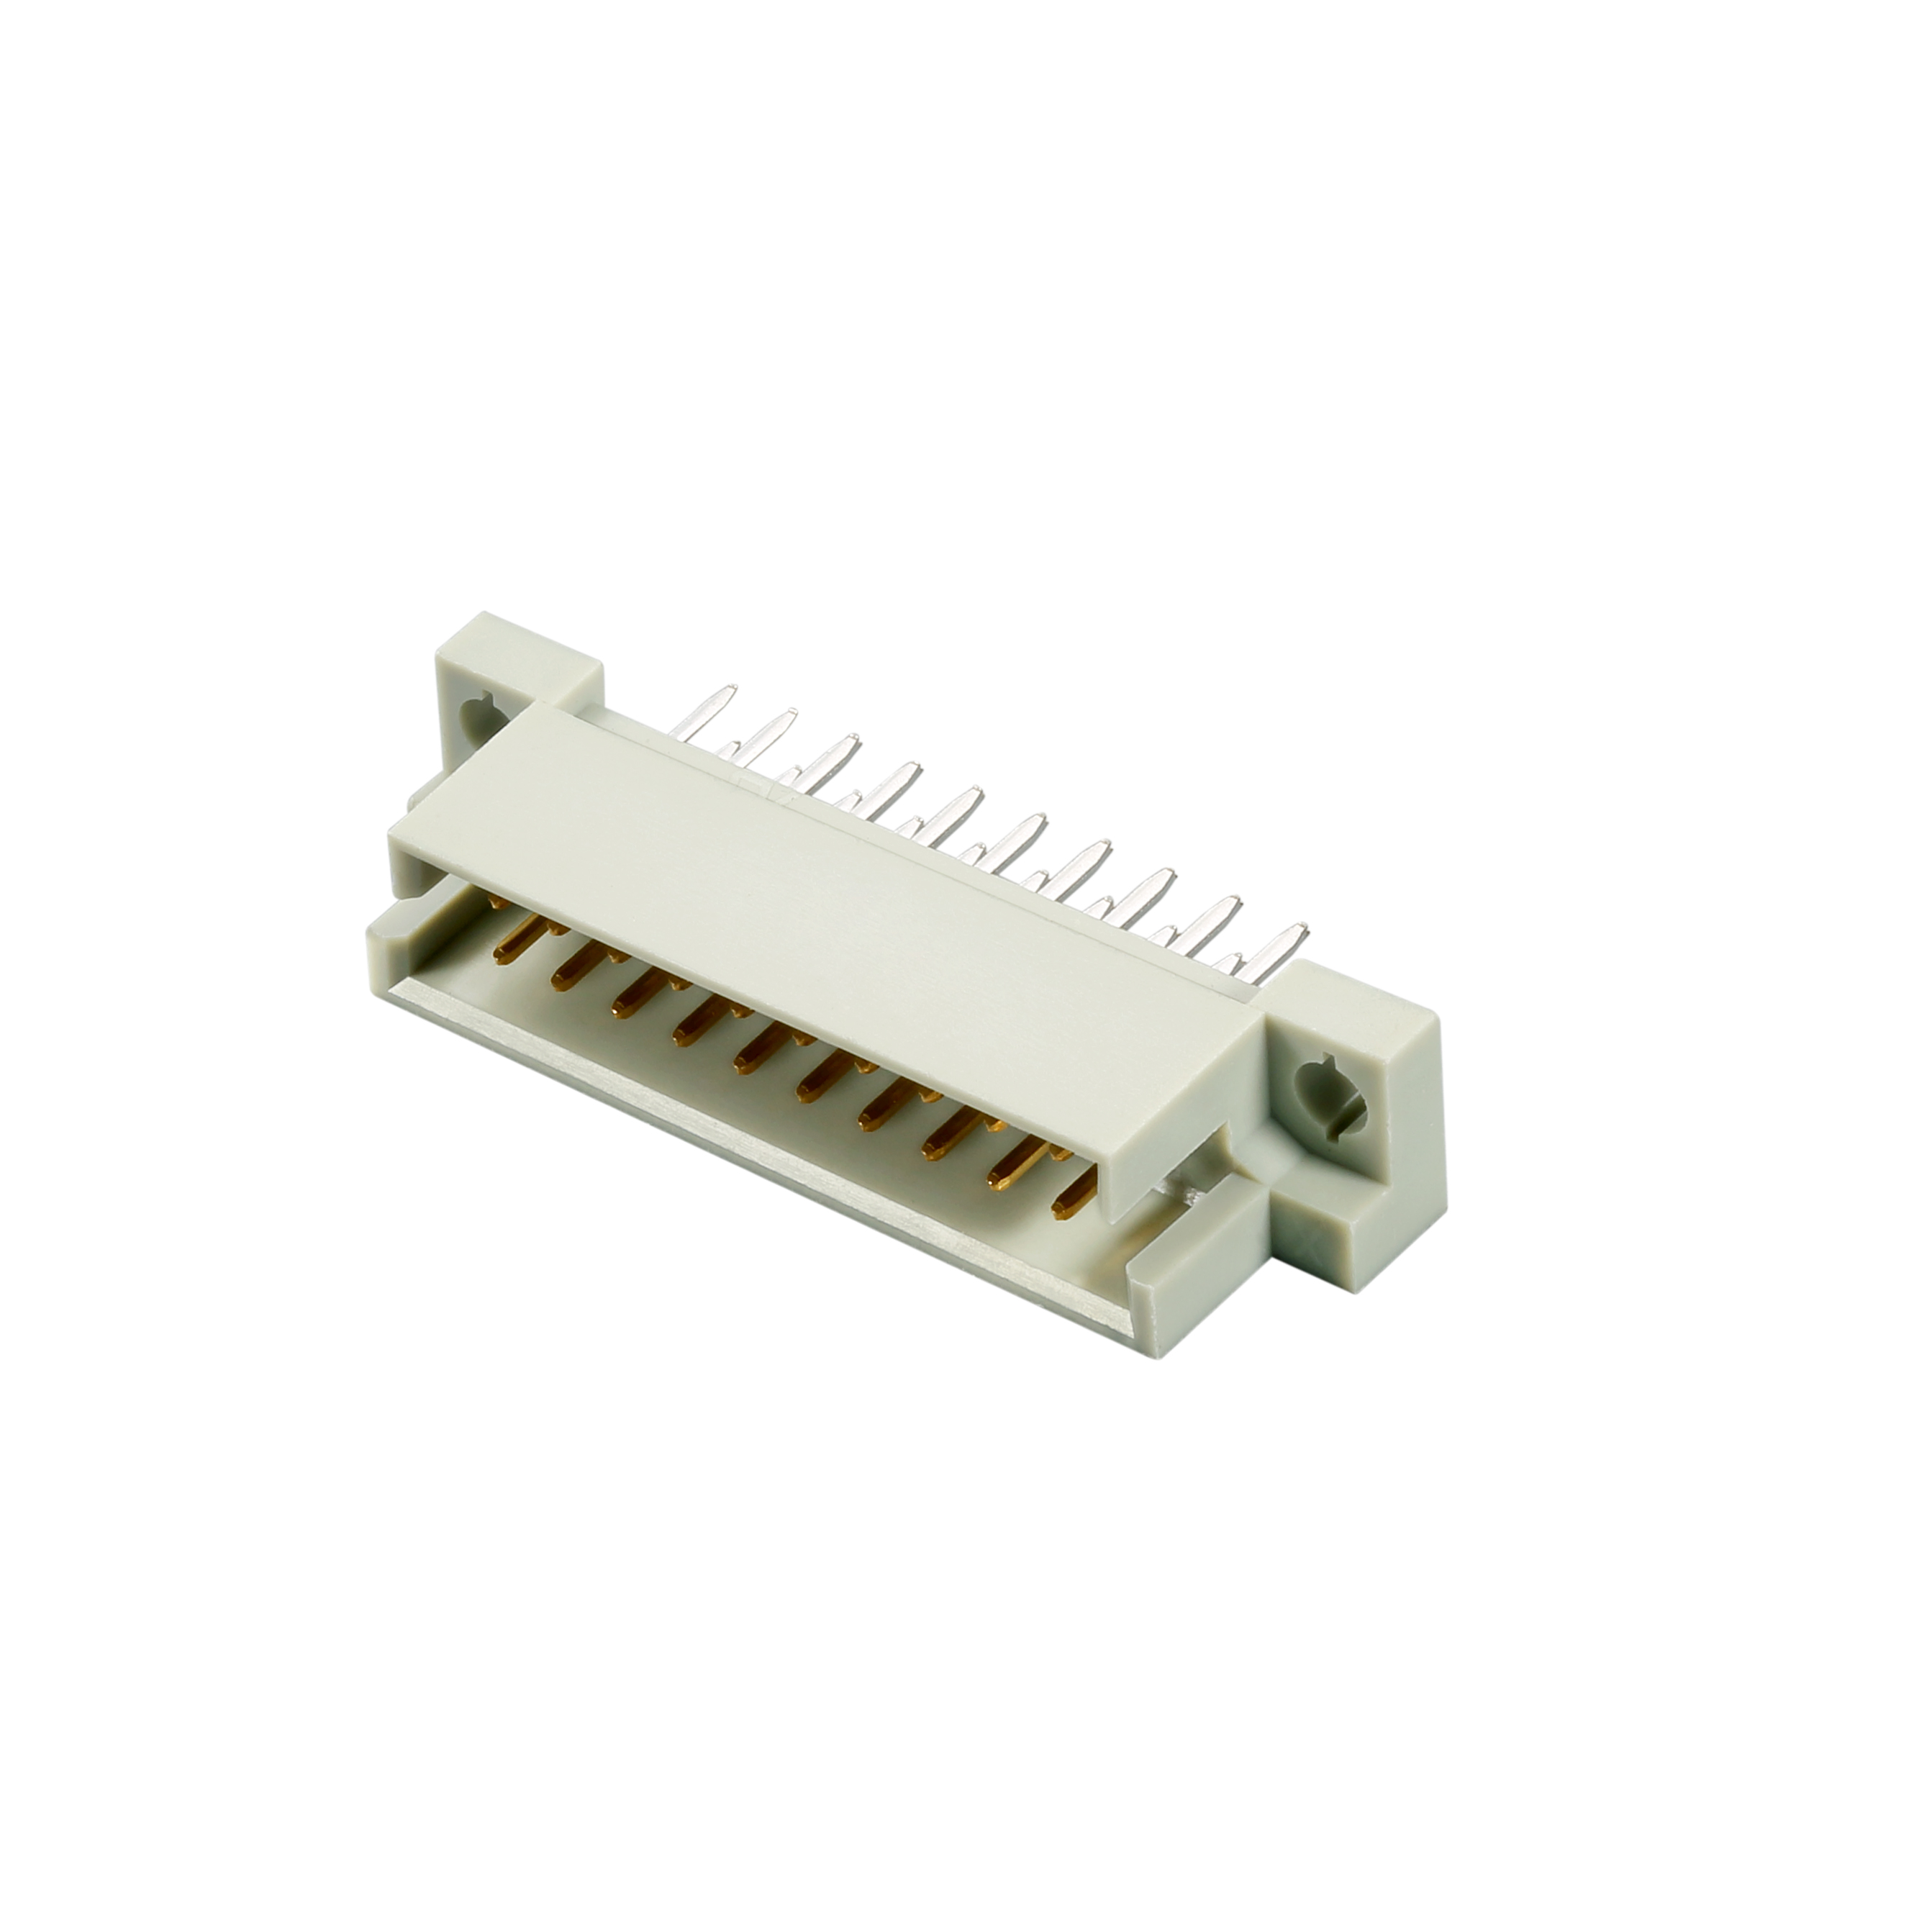 PH2.54mm DIN 41612 Dual Row Straight-type  Connector